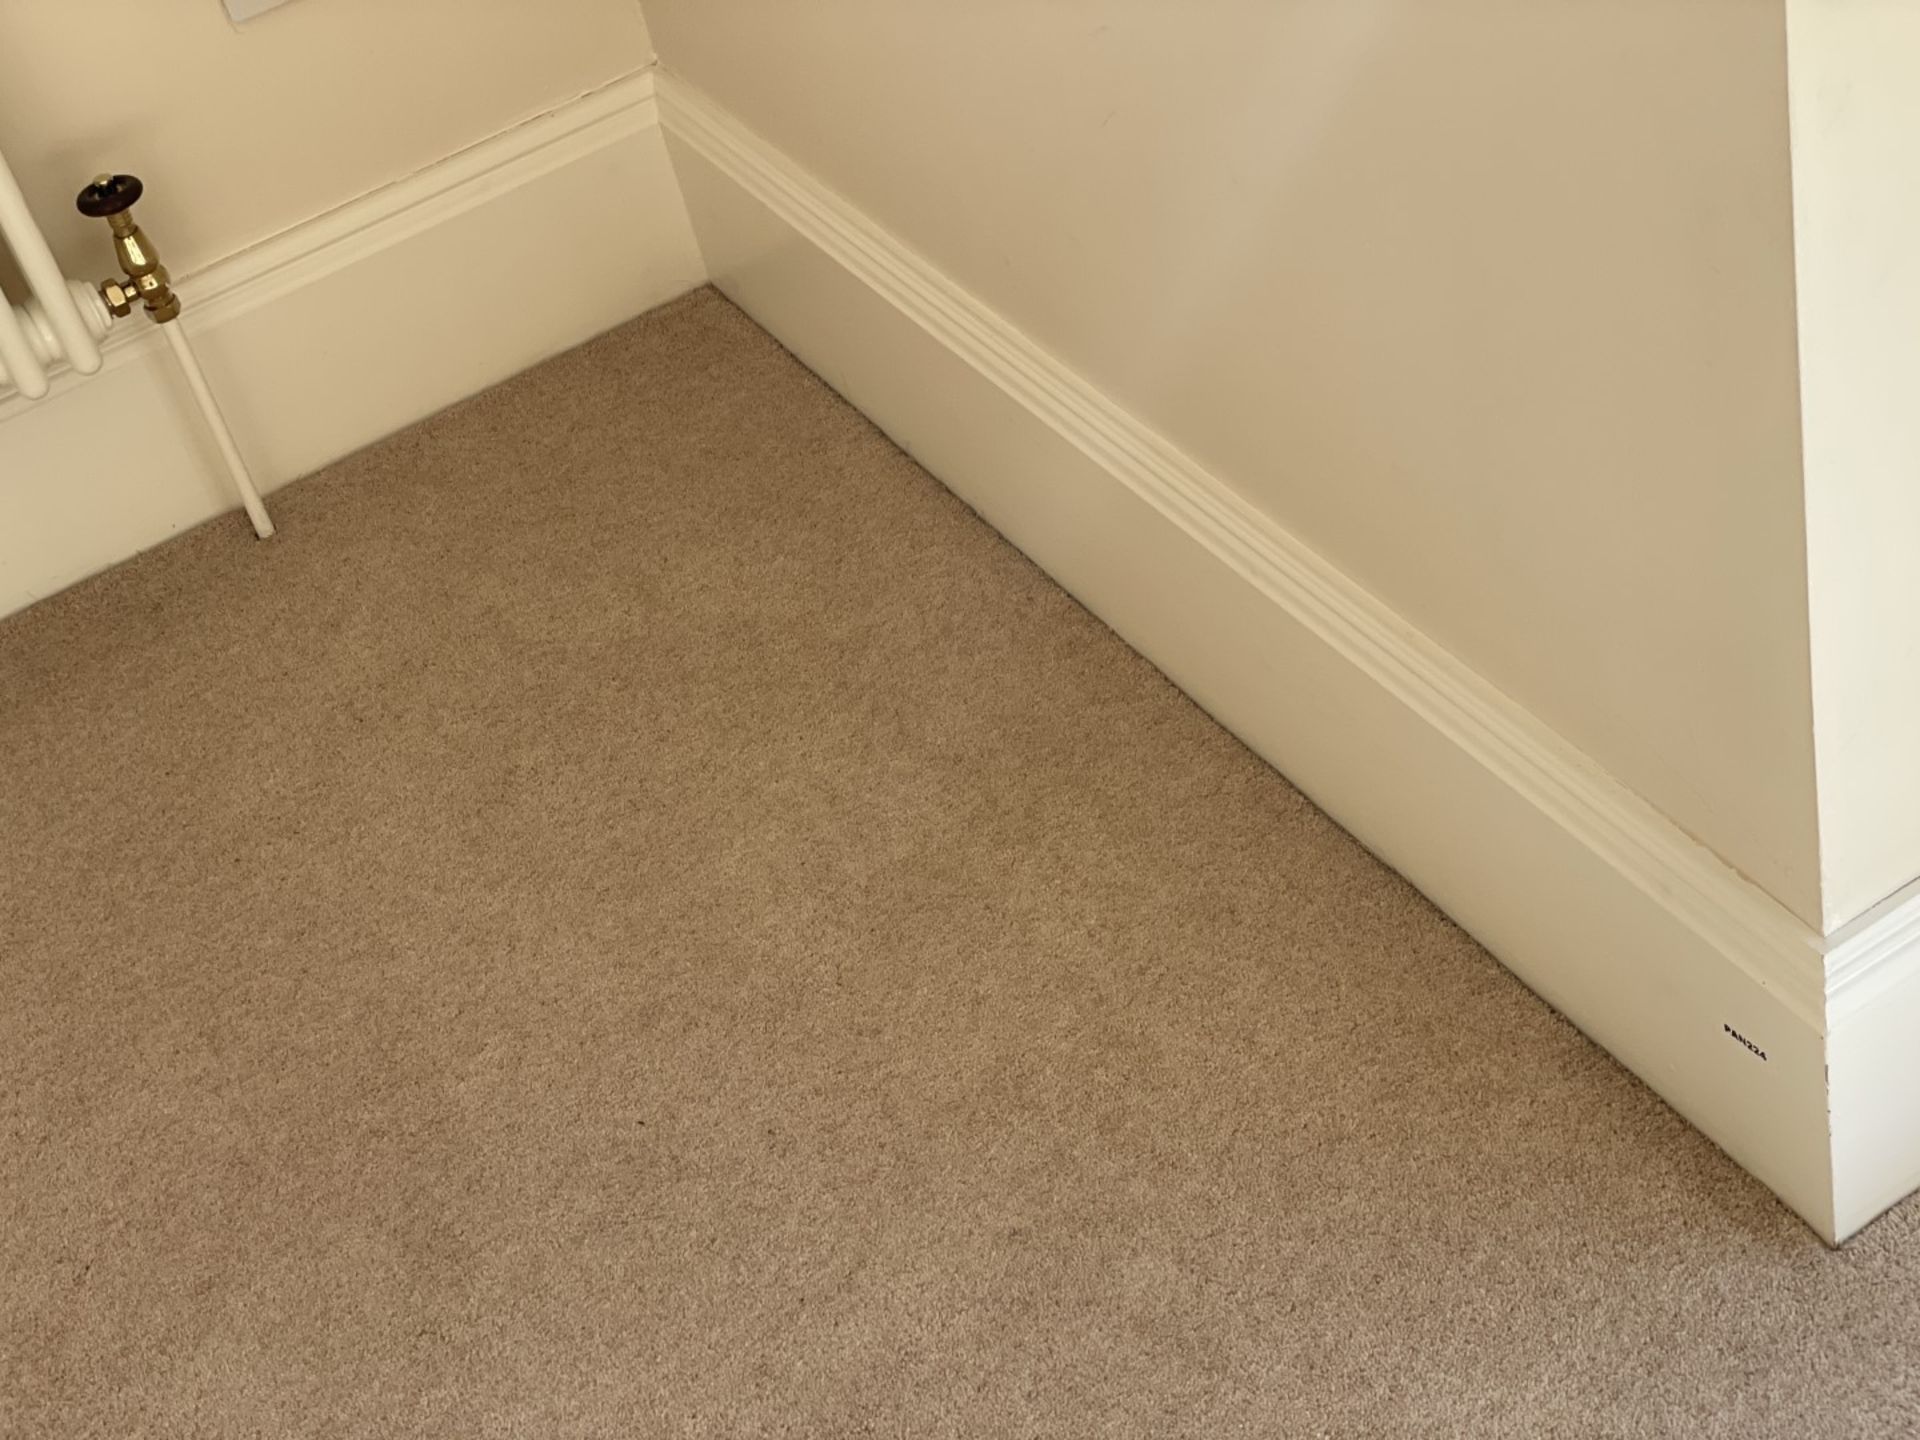 1 x Approximately 22-Metres of Painted Timber Wooden Skirting Boards, In White - Ref: PAN224 - CL896 - Image 5 of 10